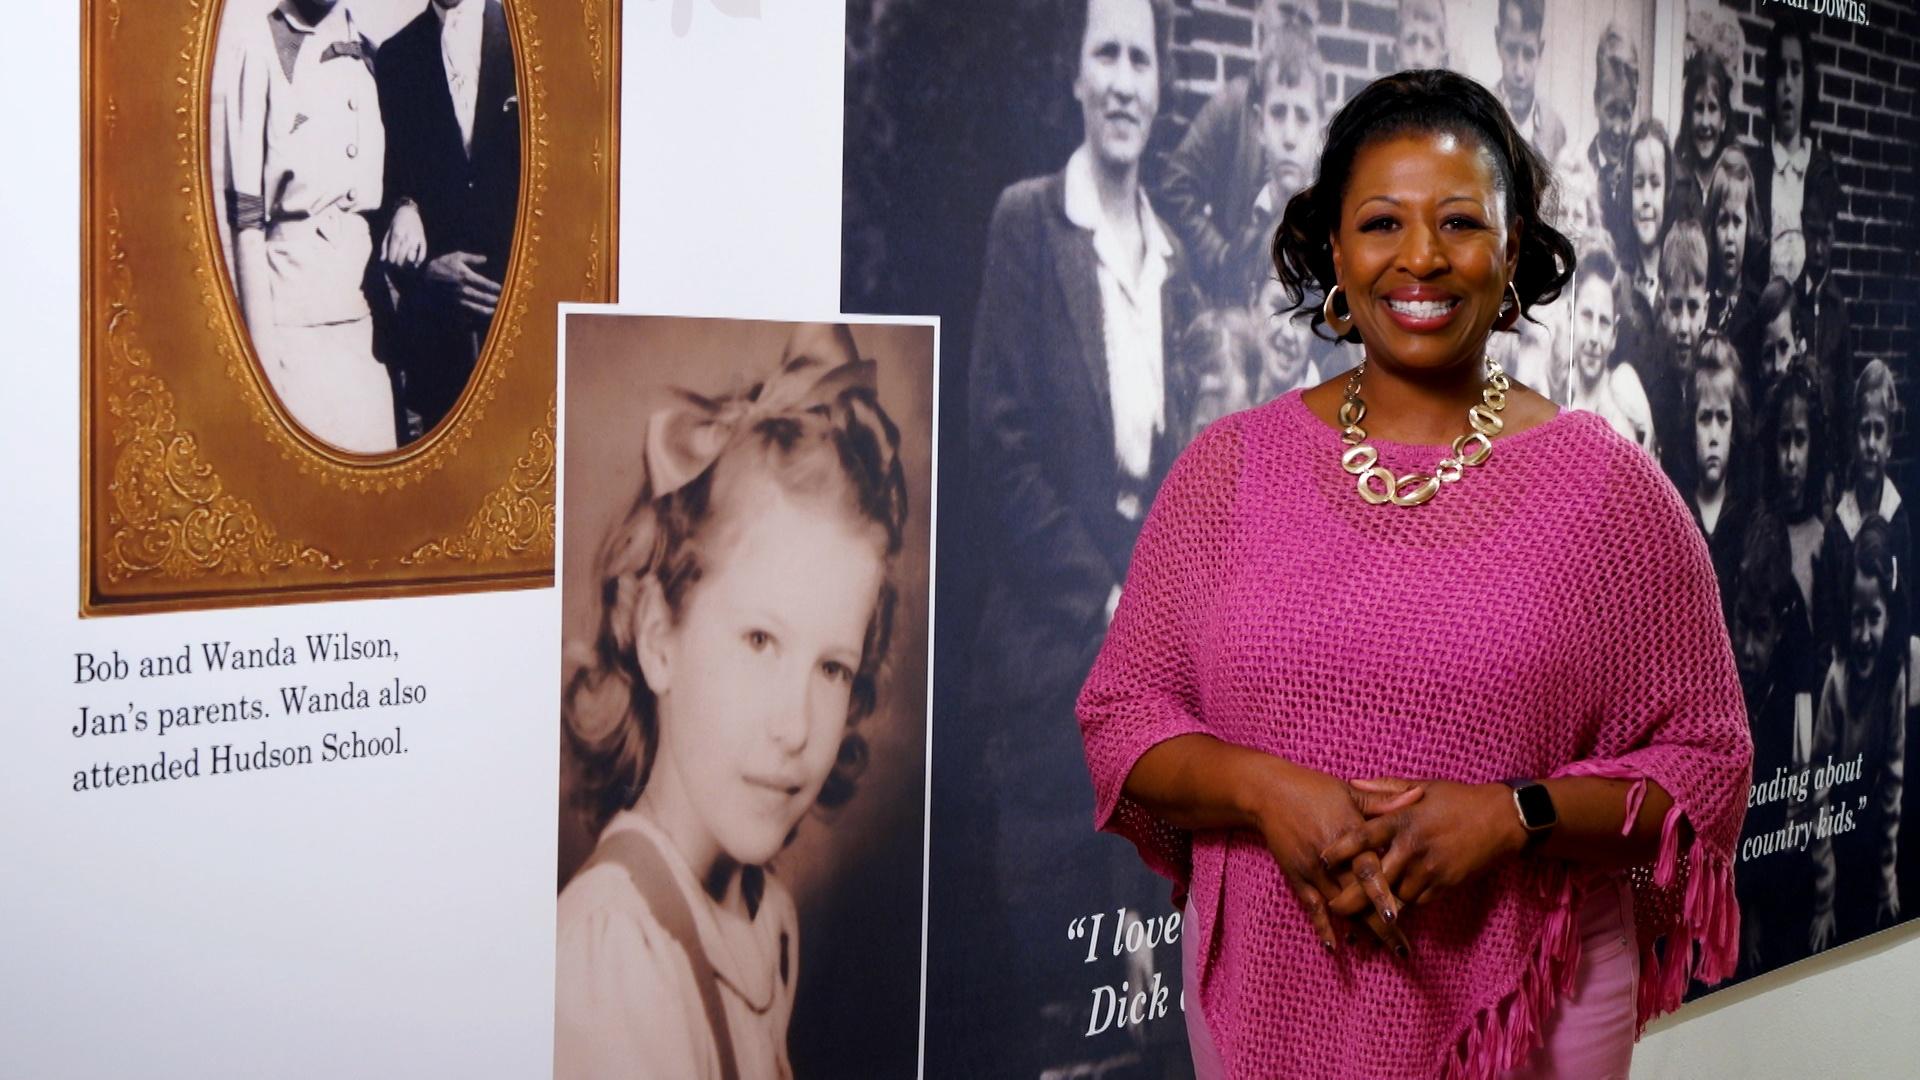 Host of NC Weekend, Deborah Holt Noel, wearing a bright pink sweater and a large circular necklace while standing in front of a wall full of historical images and text of Jan Karon in the Mitford Museum of Hudson, North Carolina.